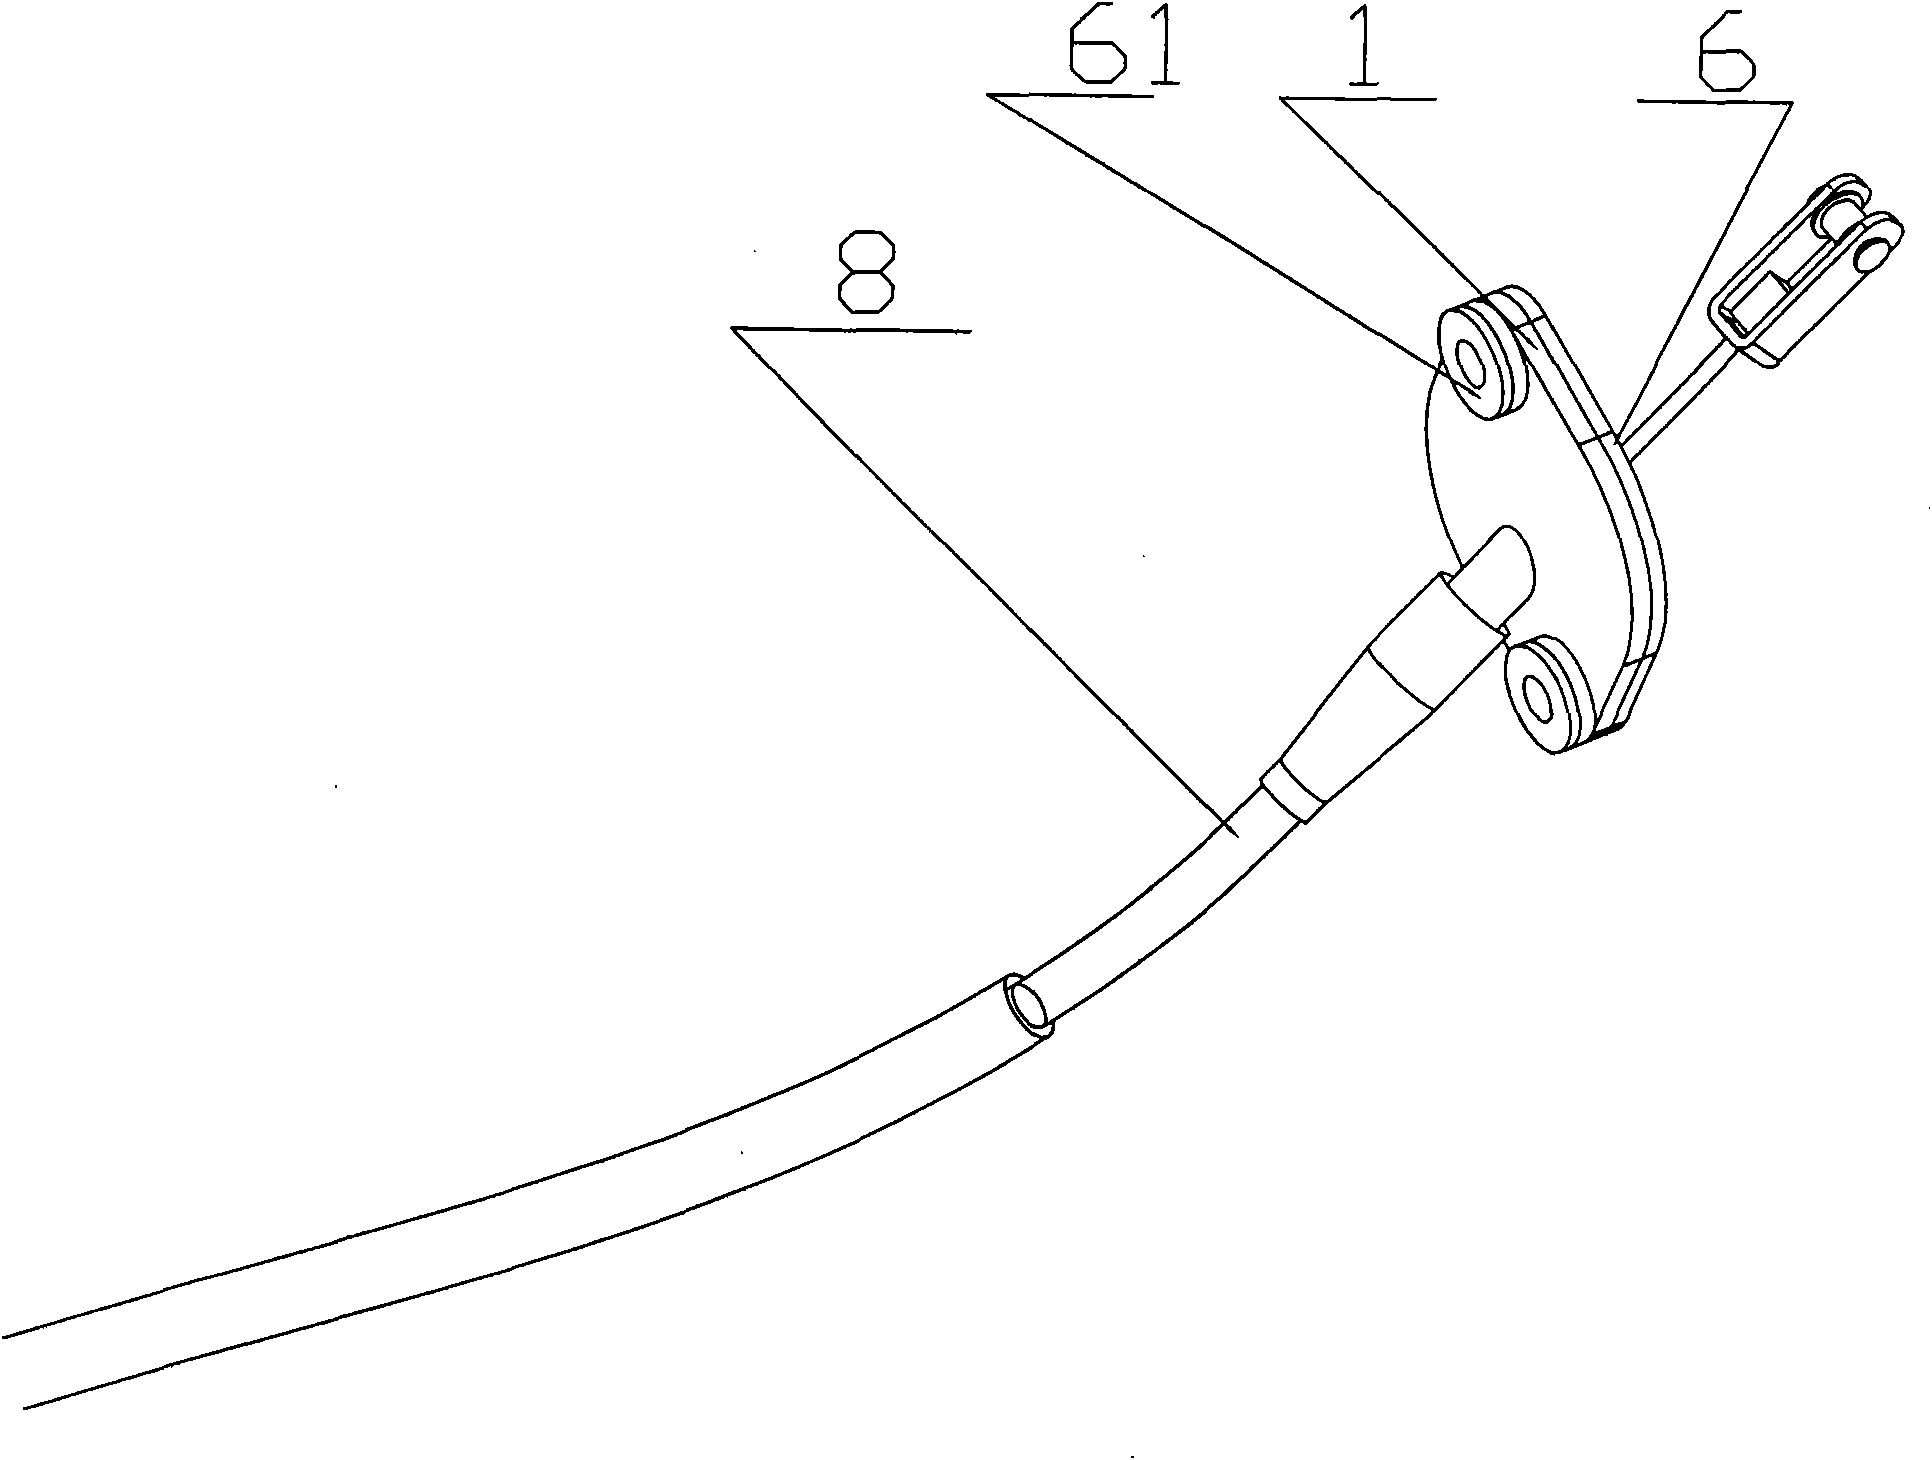 Assembly component of automobile clutch cable on front wall board of automobile